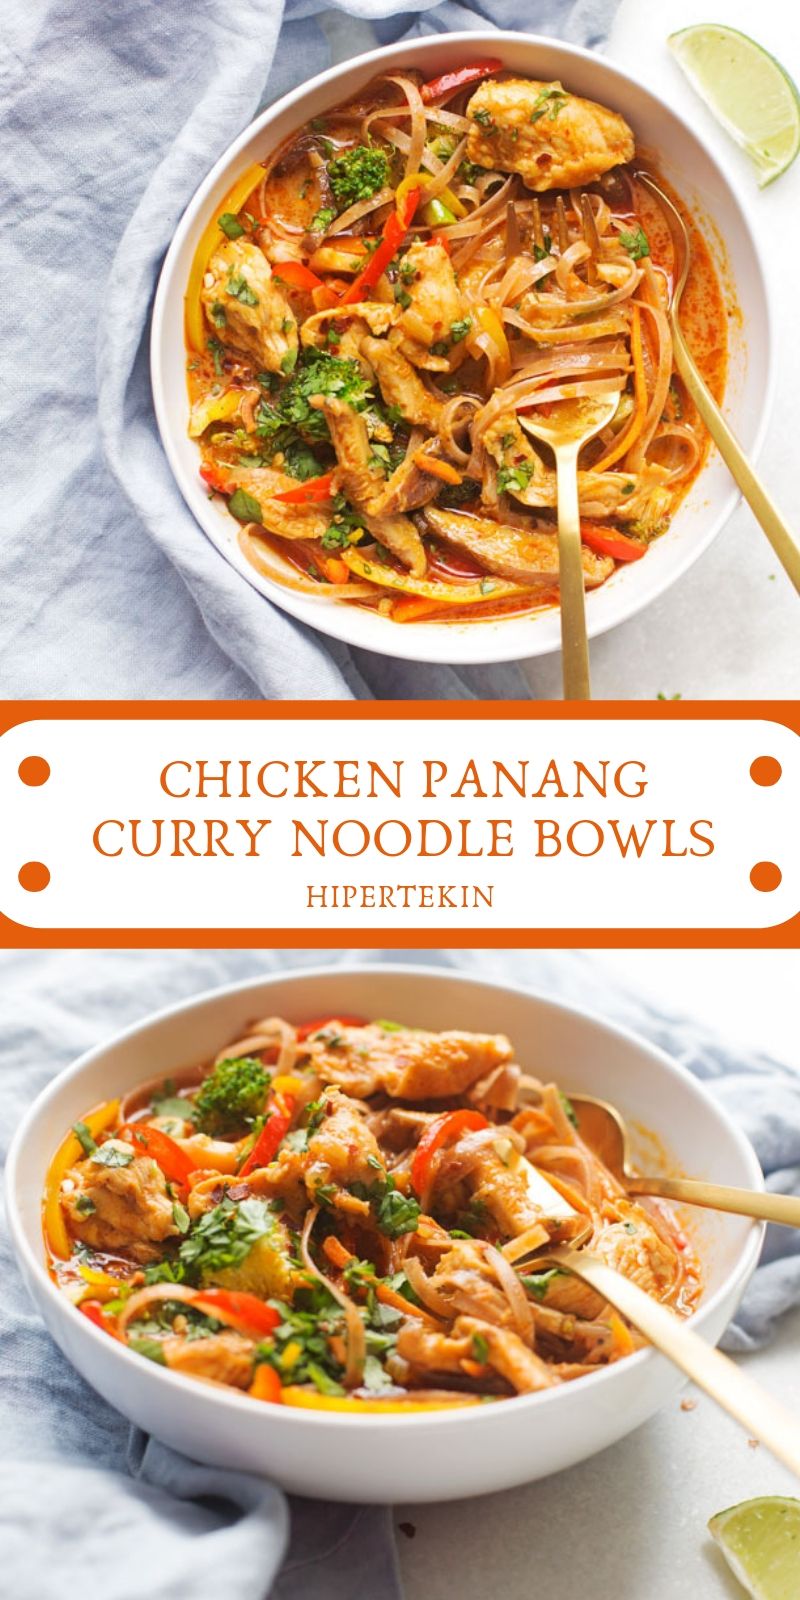 CHICKEN PANANG CURRY NOODLE BOWLS